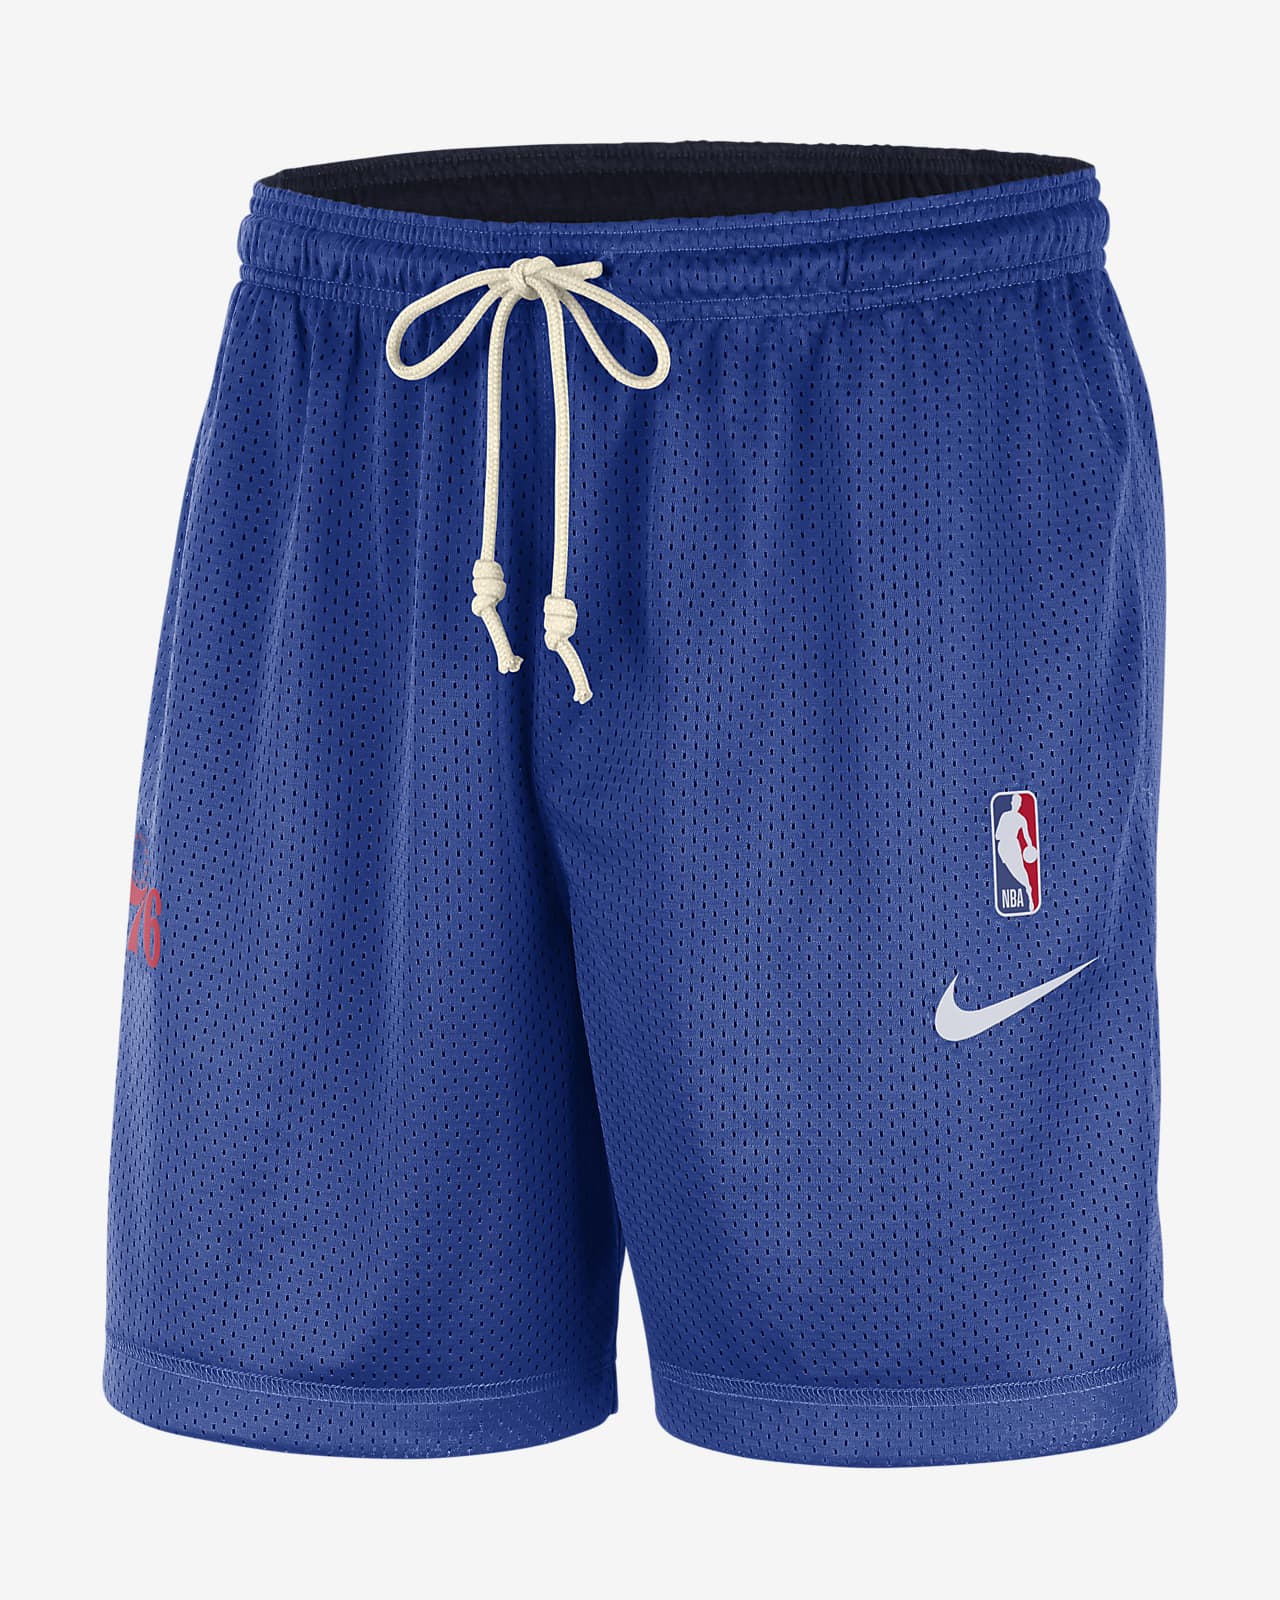 https://static.nike.com/a/images/t_PDP_1280_v1/f_auto,q_auto:eco/7d550fbf-f44f-4ee6-b798-ebe0609bcace/76ers-standard-issue-mens-nba-reversible-shorts-NrZJf0.png